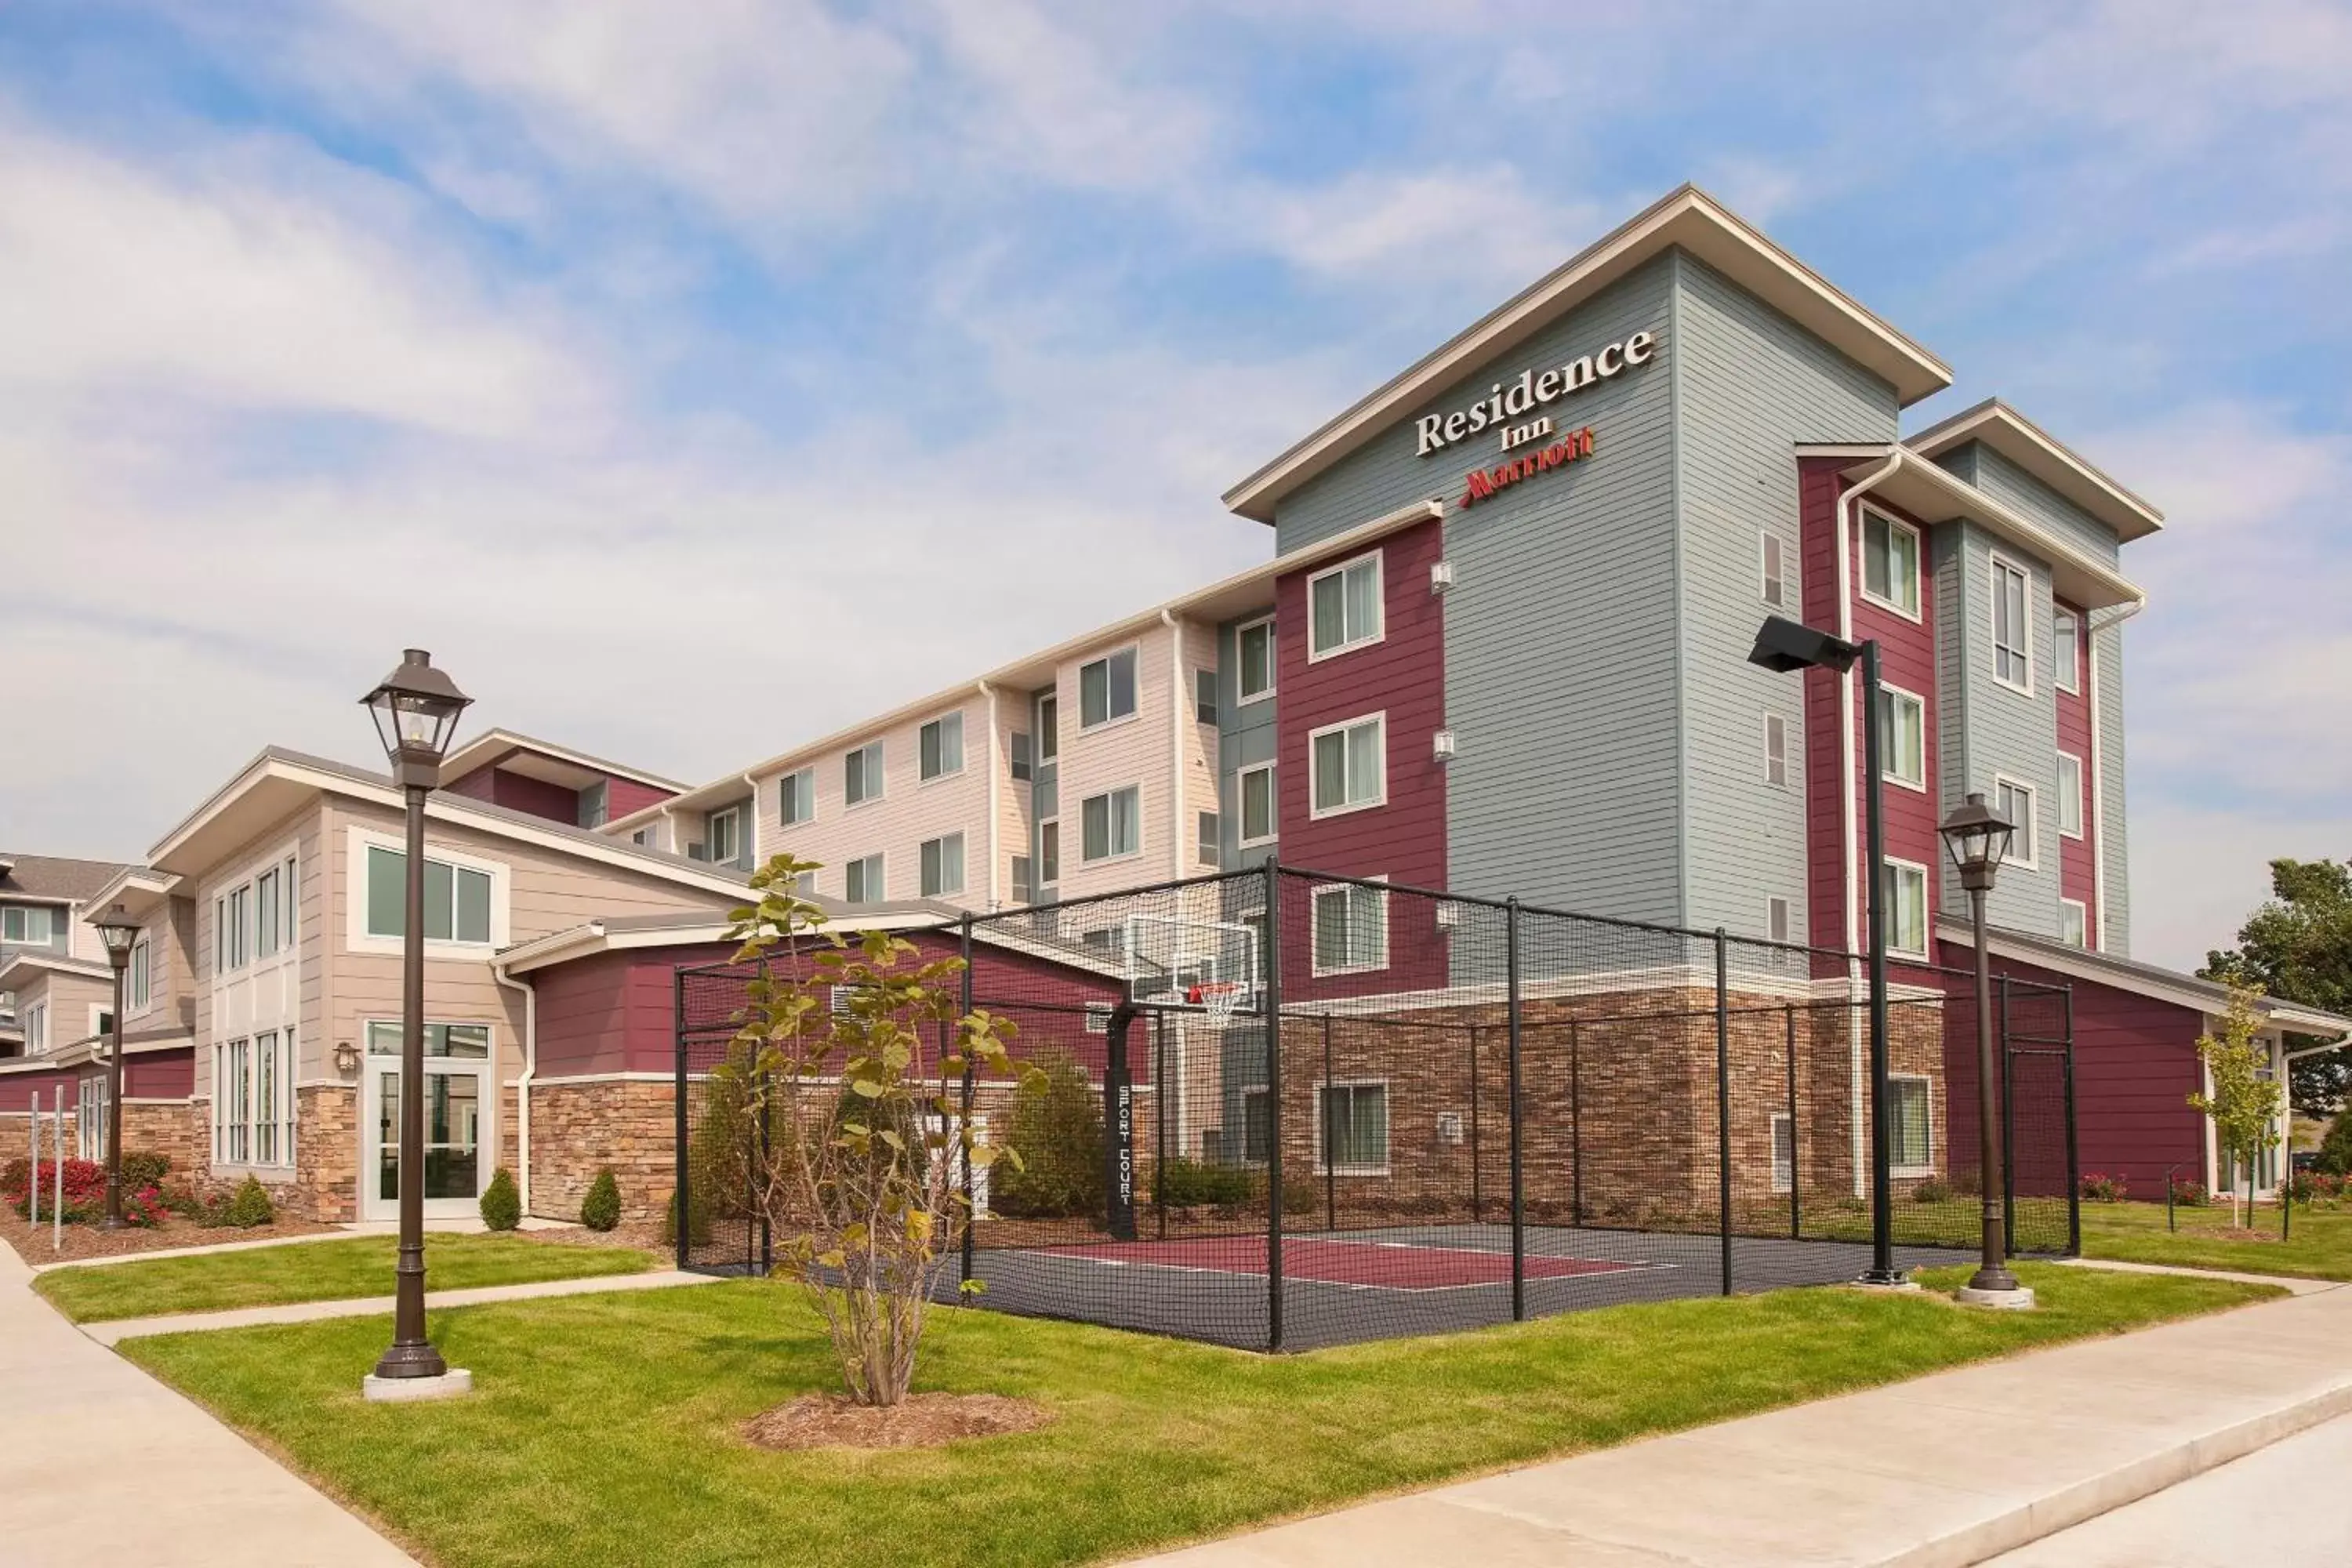 Area and facilities, Property Building in Residence Inn by Marriott Bloomington